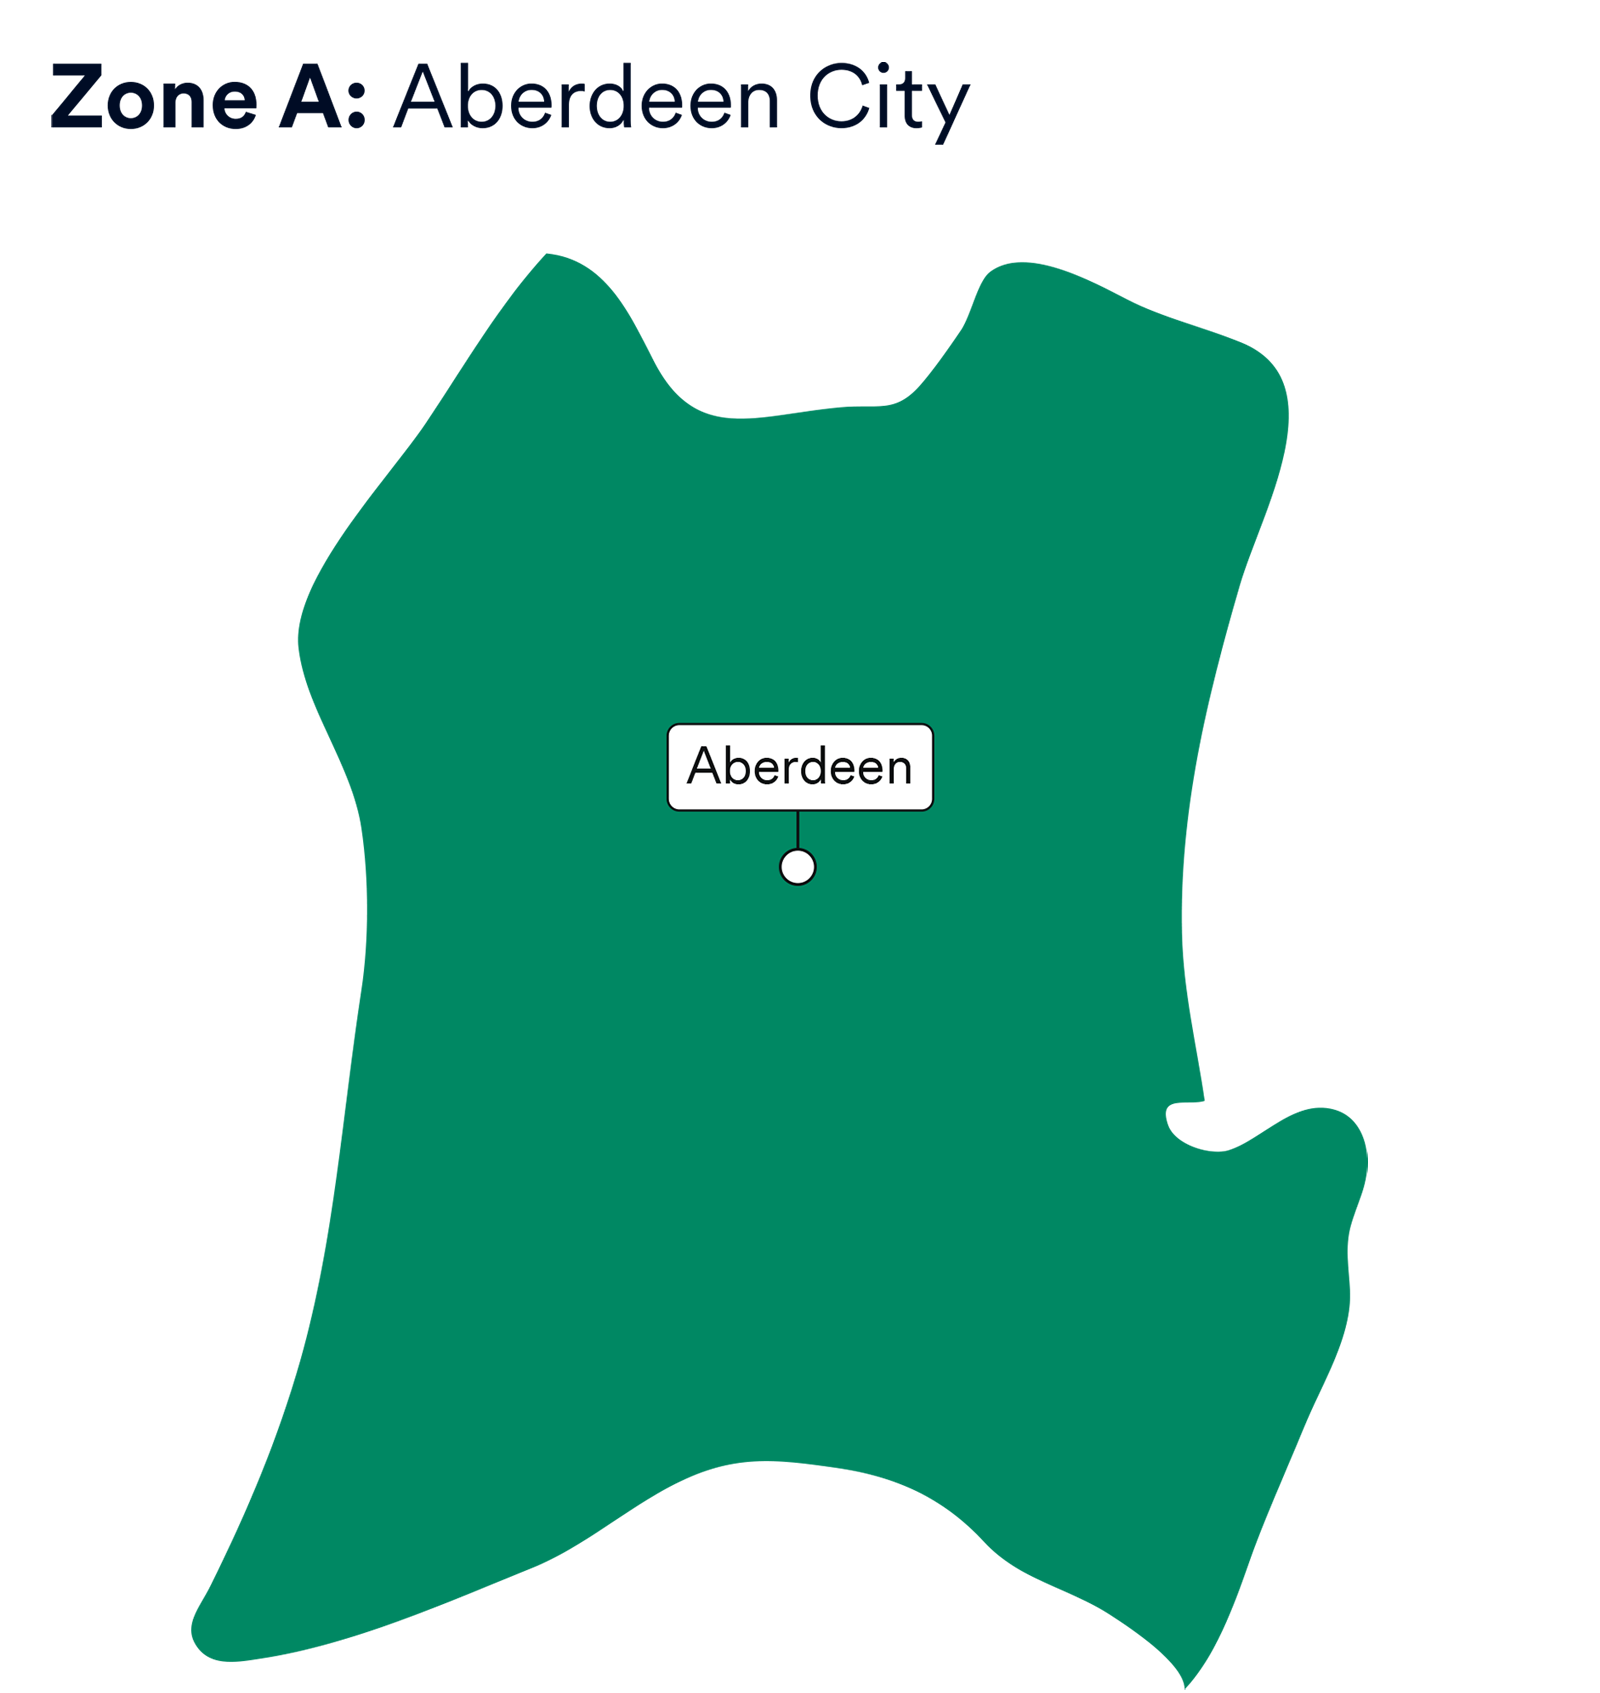 map for zone 1 travel - Aberdeen City